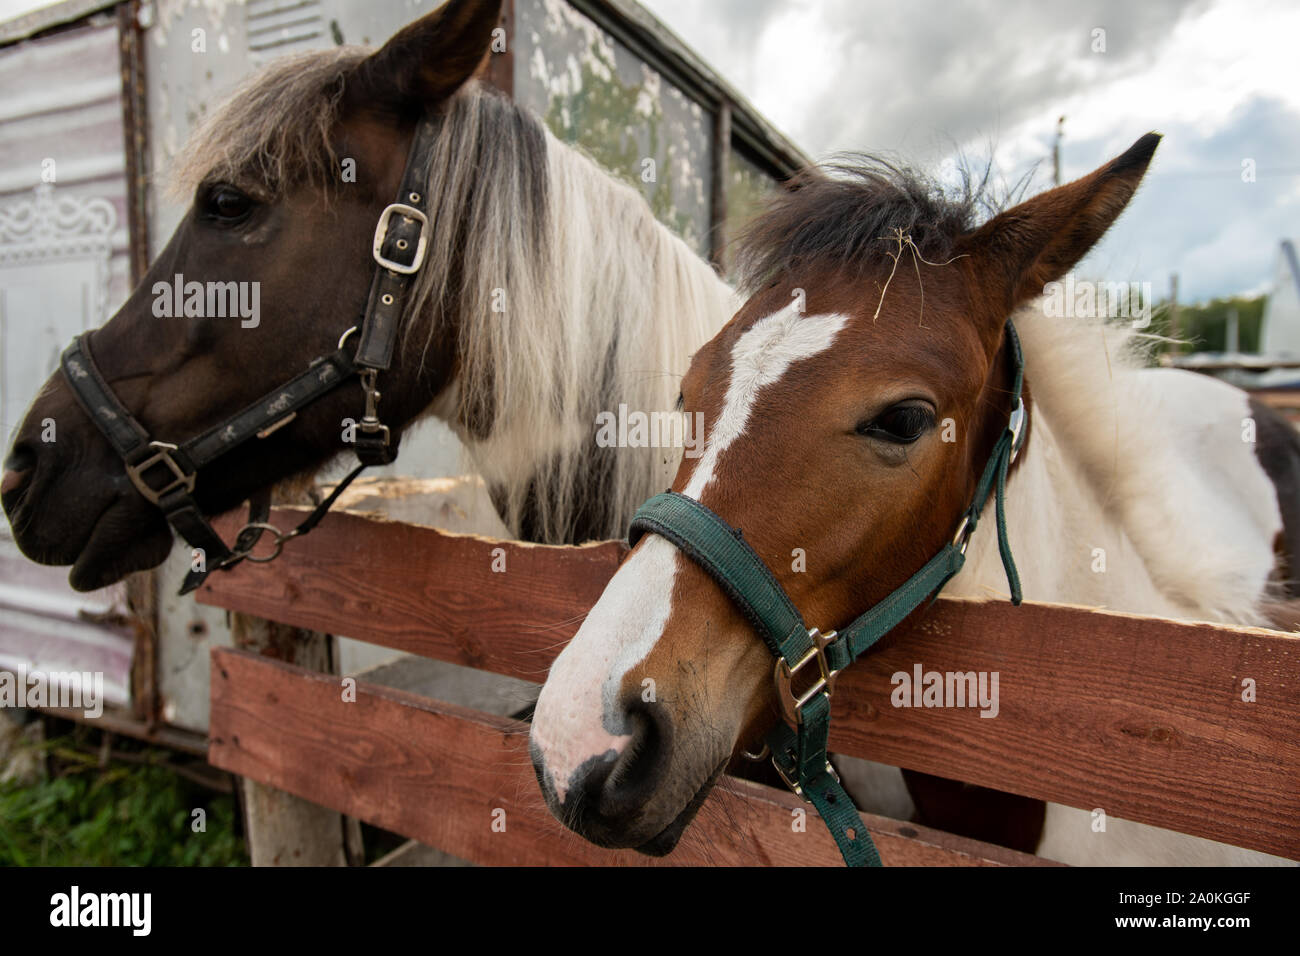 Purebred mare and stallion with white manes standing by wooden fence Stock Photo